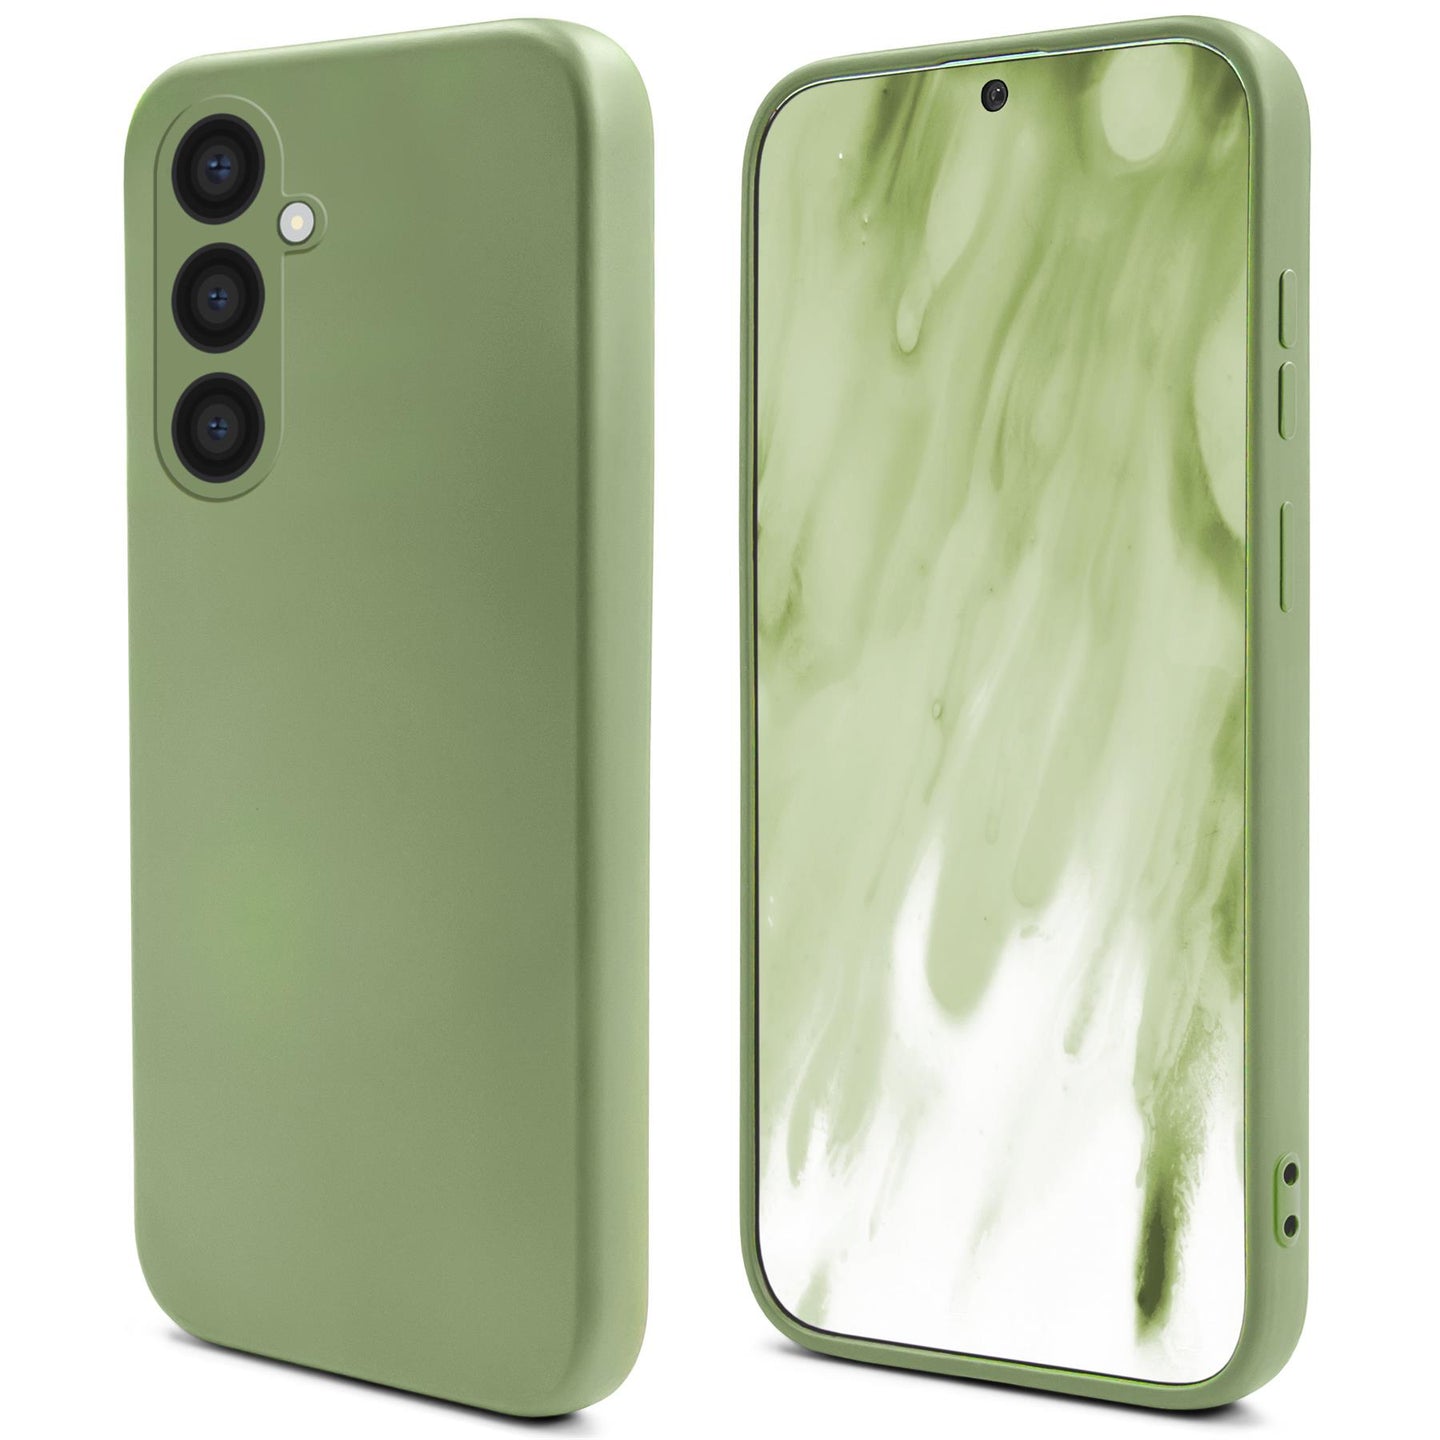 Moozy Lifestyle. Silicone Case for Samsung A54 5G, Mint green - Liquid Silicone Lightweight Cover with Matte Finish and Soft Microfiber Lining, Premium Silicone Case